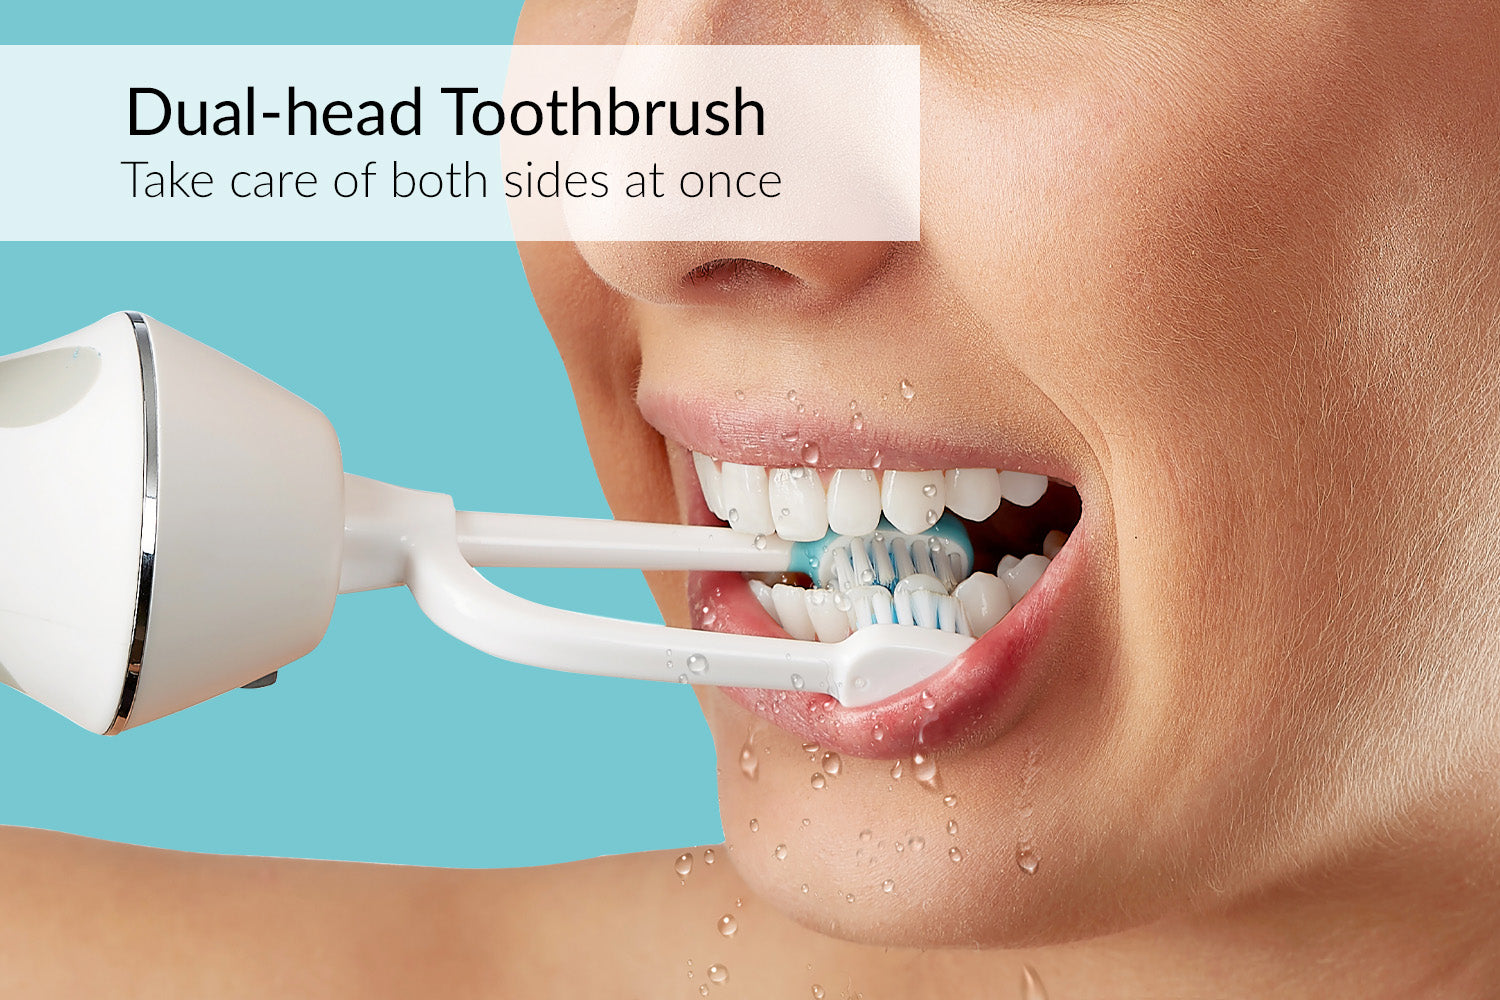 Dual-head toothbrush water flosses and brushes your teeth and gums. Simple to use with your favorite toothpaste, then after brushing turn on the water to flush off the tooth paste and loosened food and debris. 